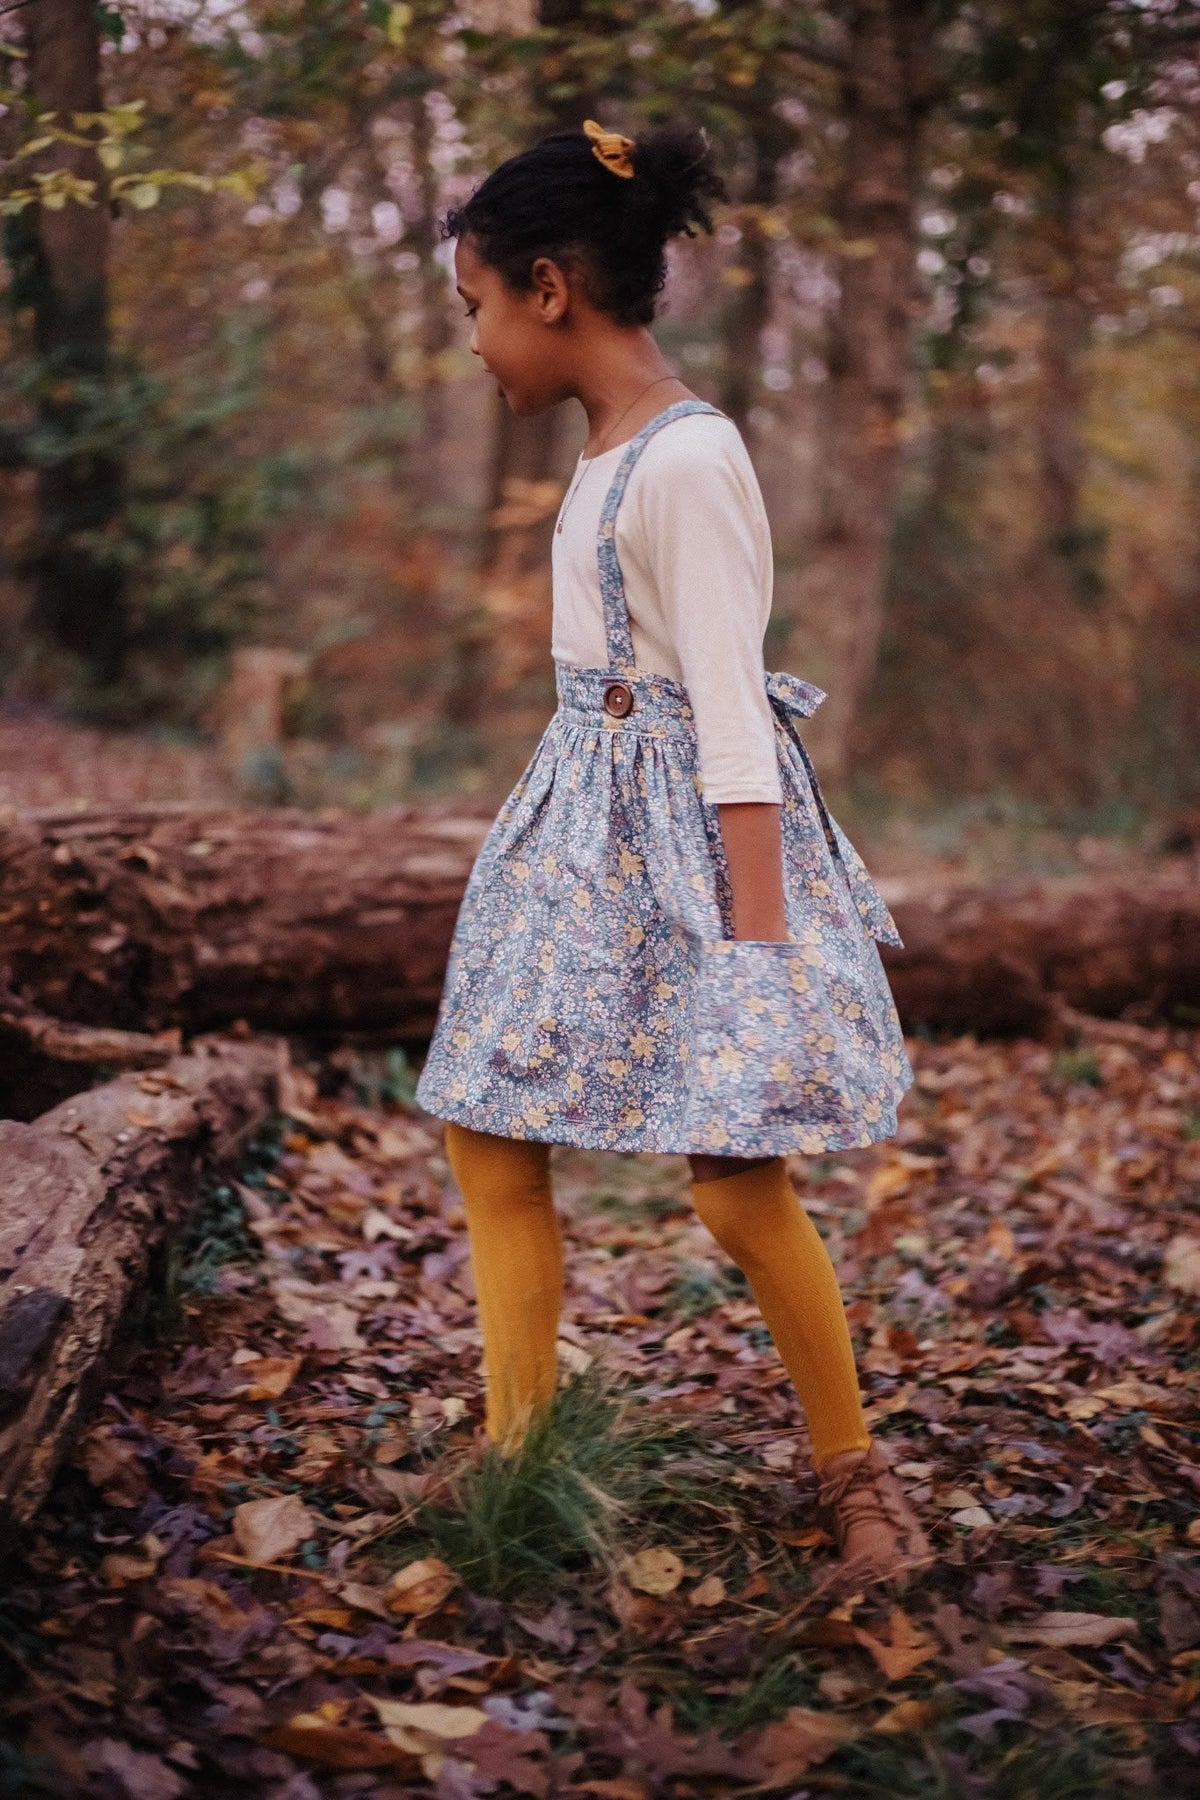 Savannah Suspender Skirt in ‘Buttercup Belle'- Ready to Ship